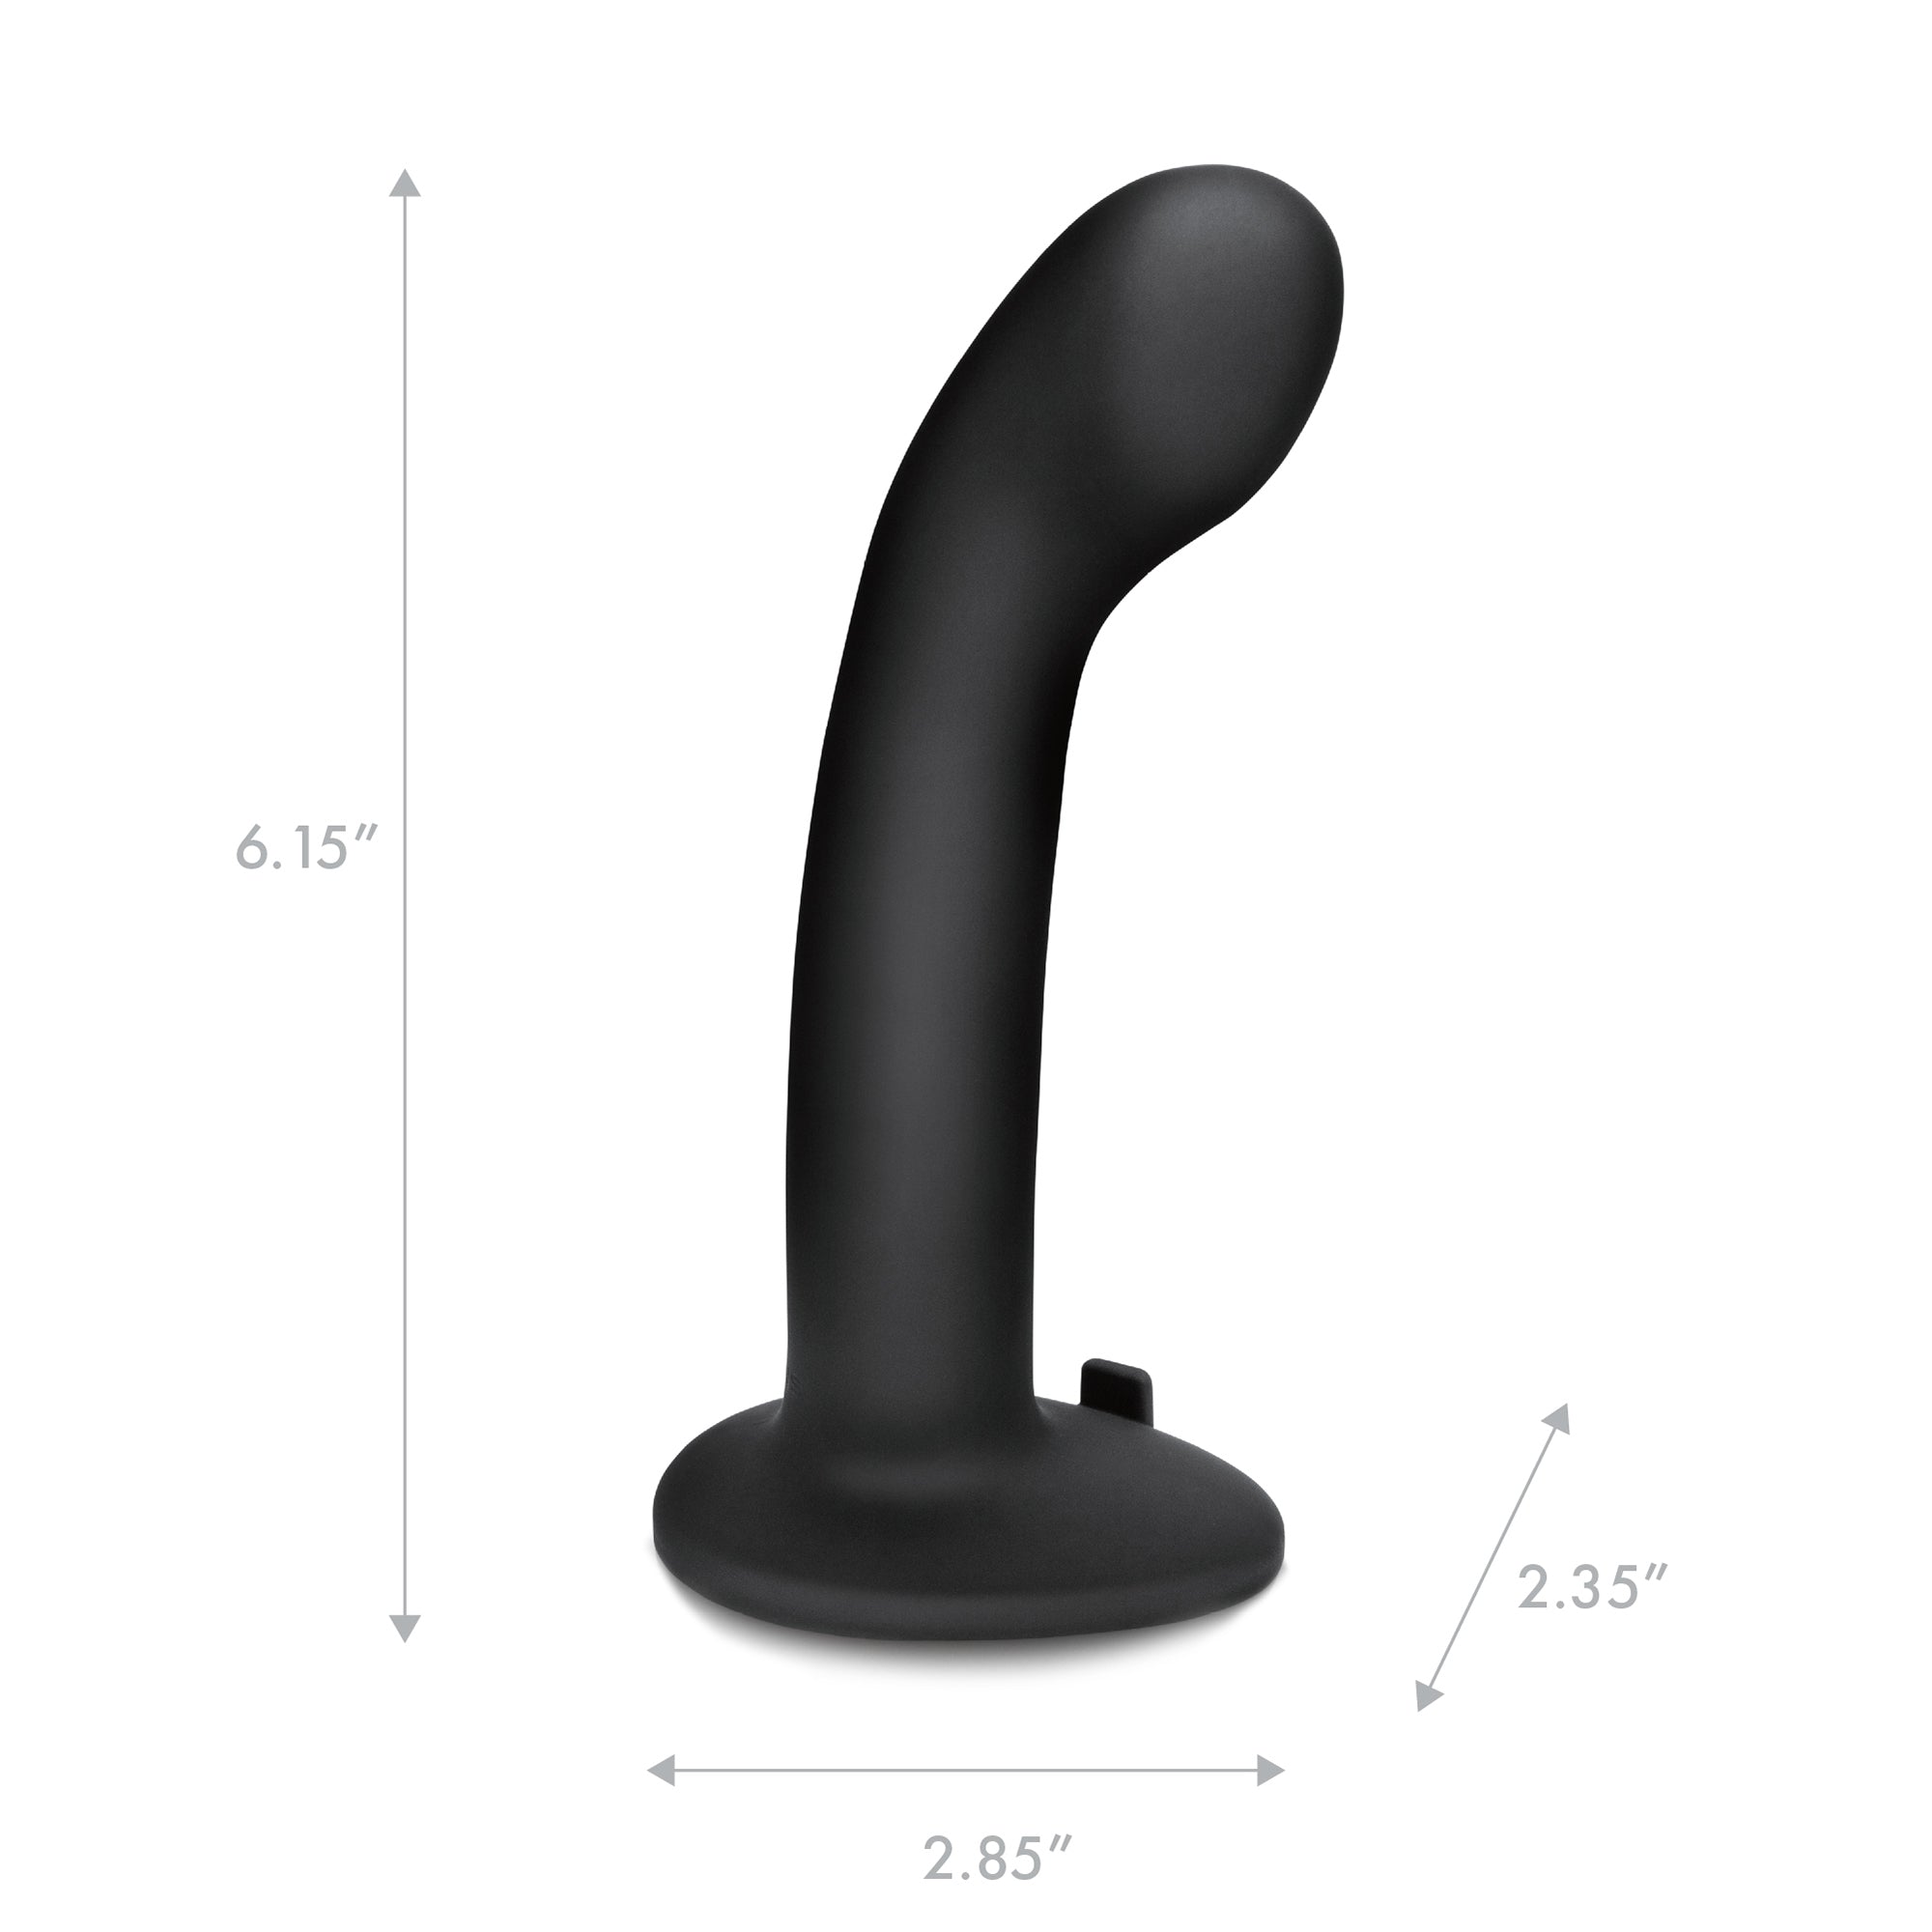 6" P-spot / G-spot Silicone Peg with harness included